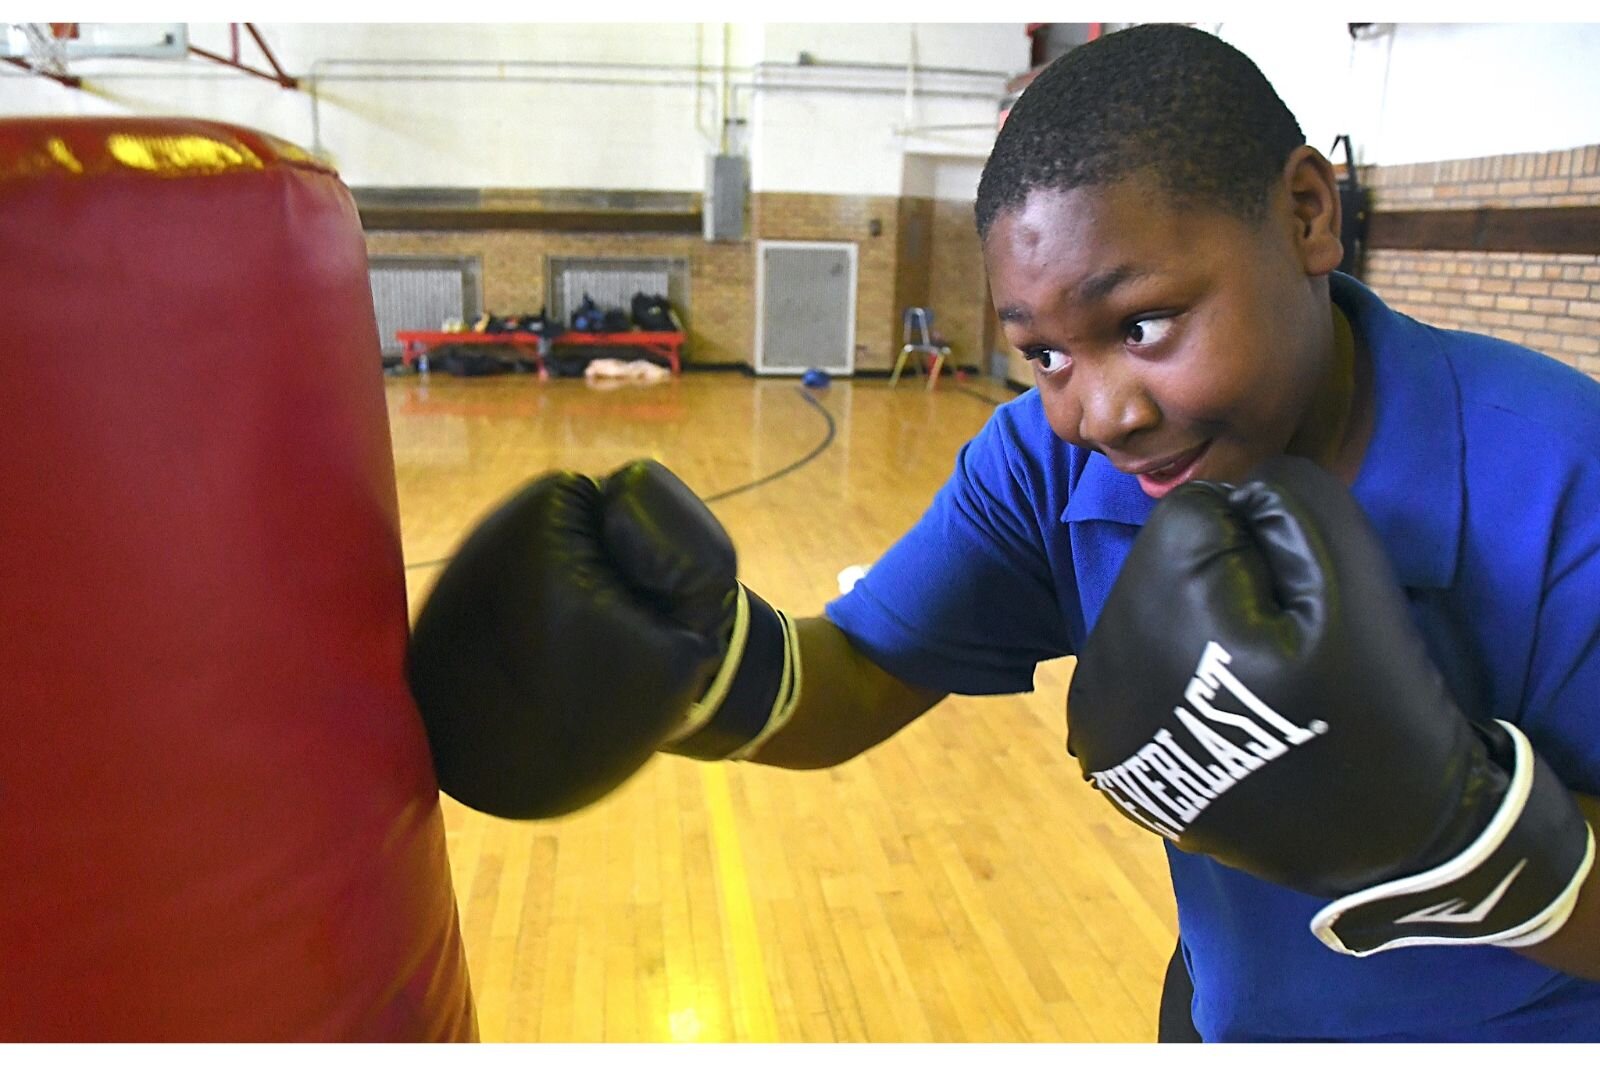 Marshaun Caldwell, wearing boxing gloves, punches a bag during a Cool People after-school session at Kingdom Builders.